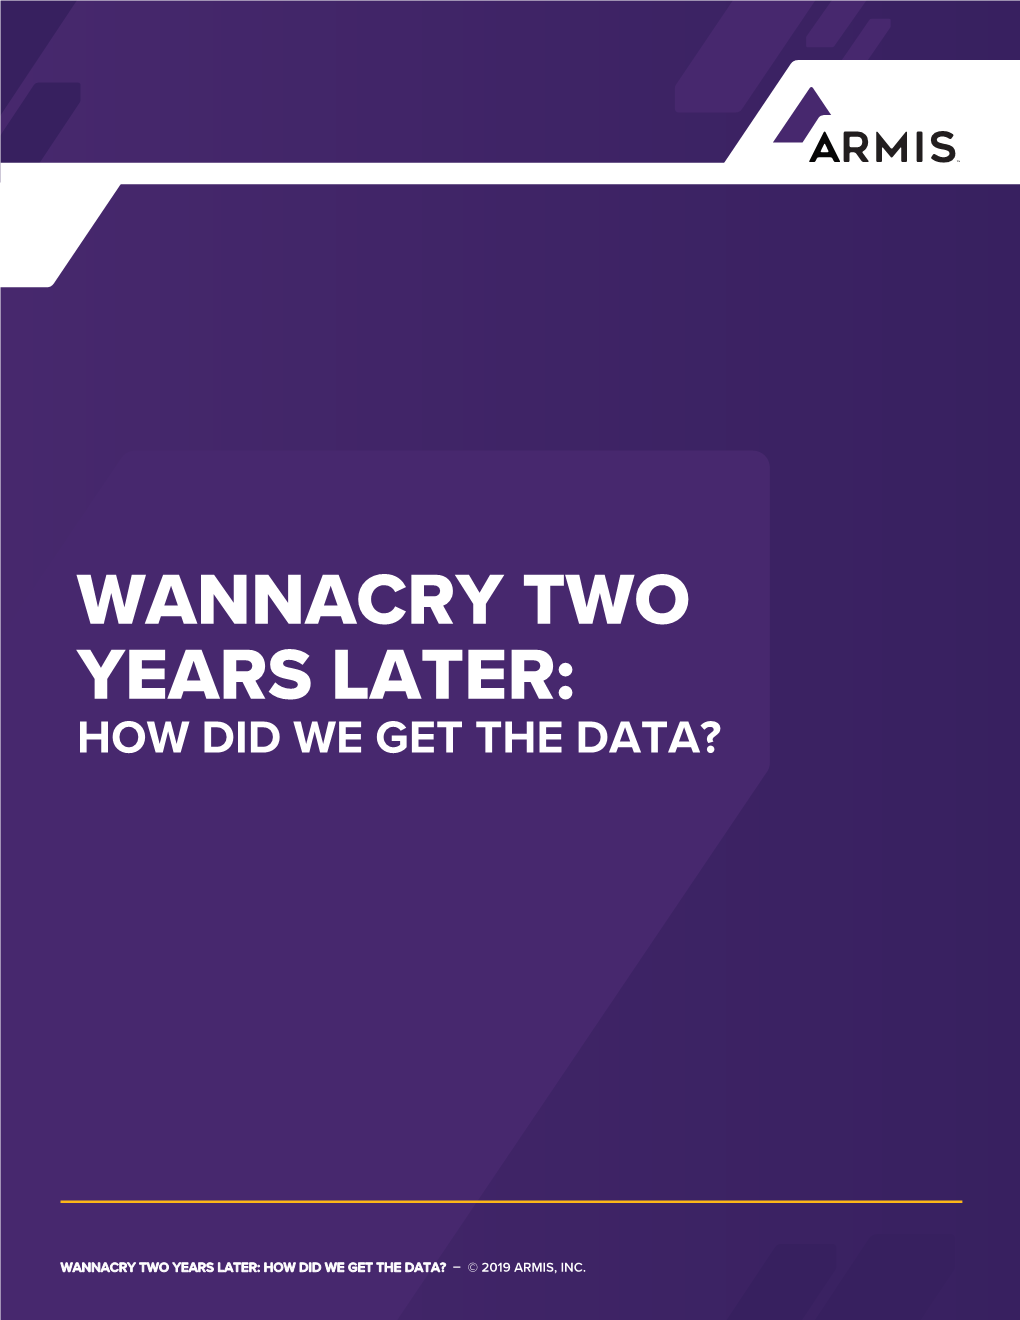 Wannacry Two Years Later: How Did We Get the Data?